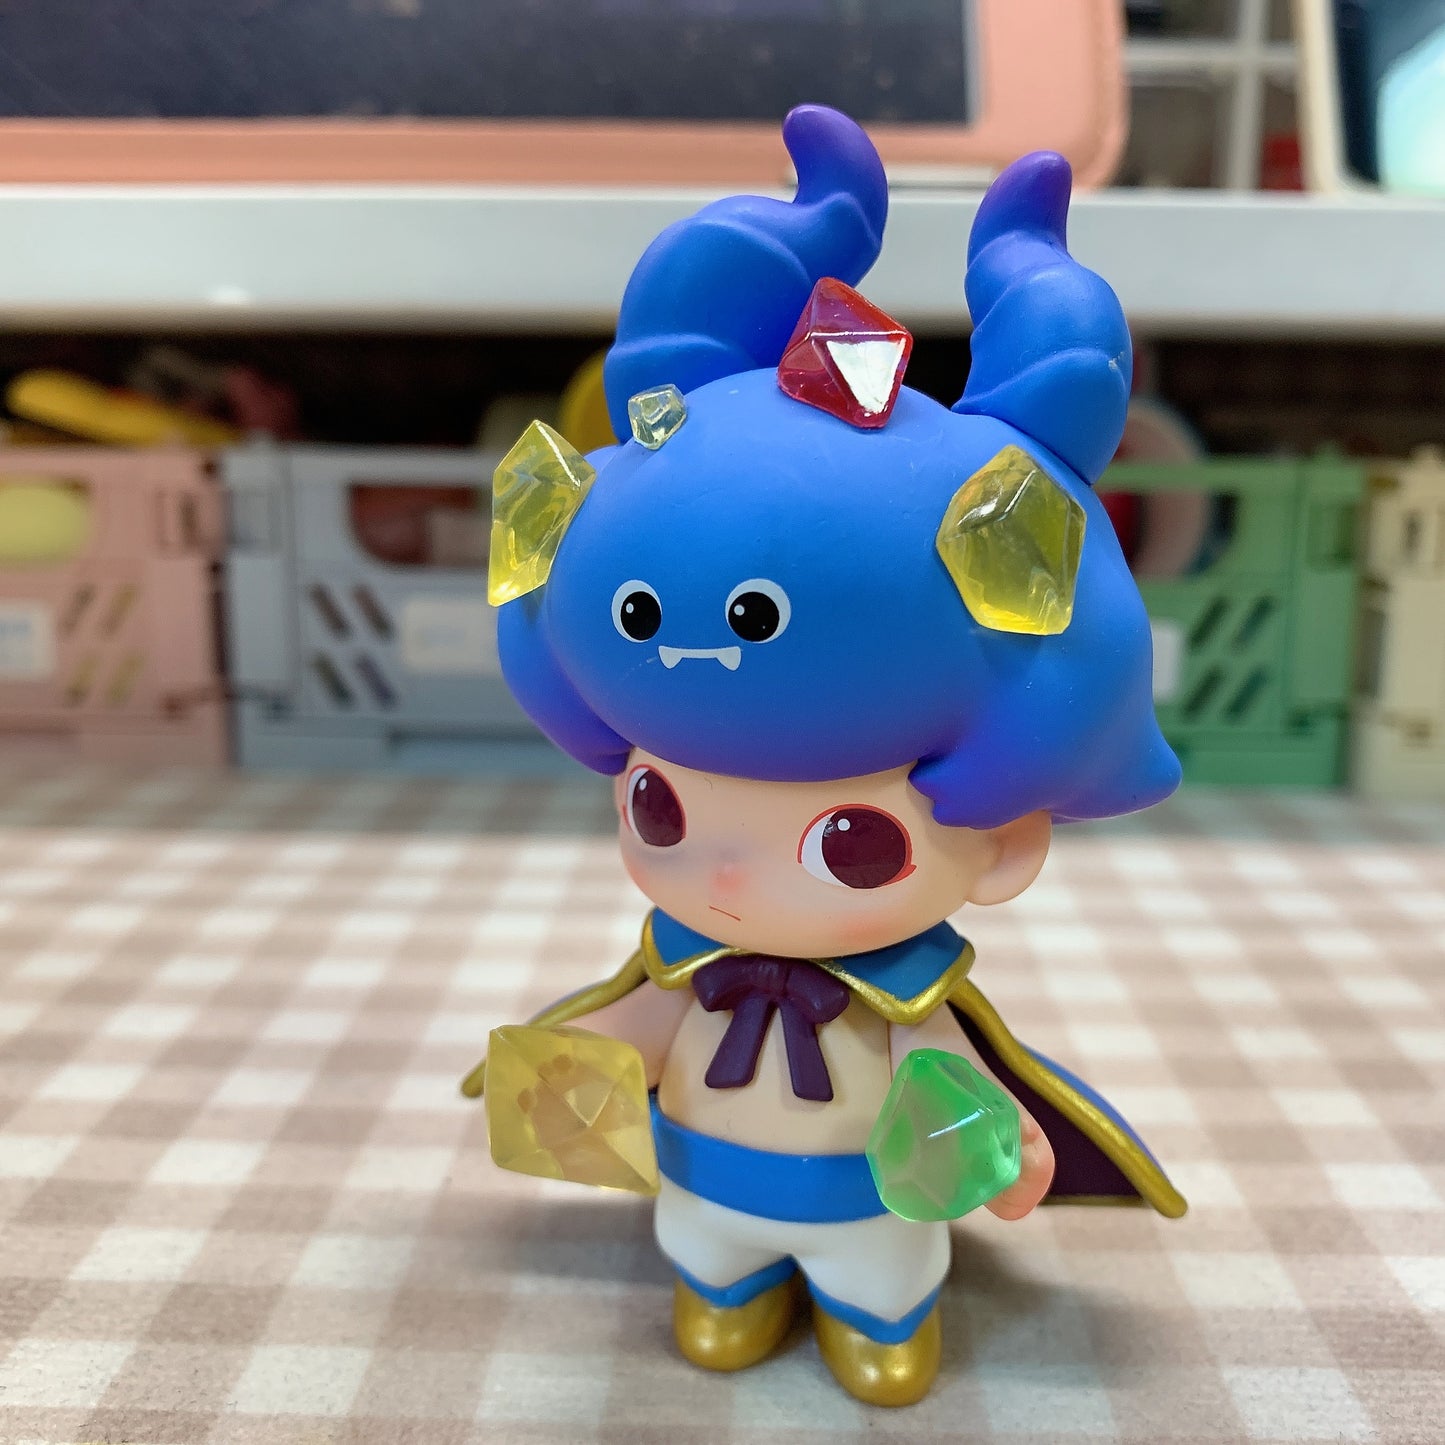 【PRELOVED and SALE 】POPMART Dimoo blind box toy Fairy Tale series Alchemist